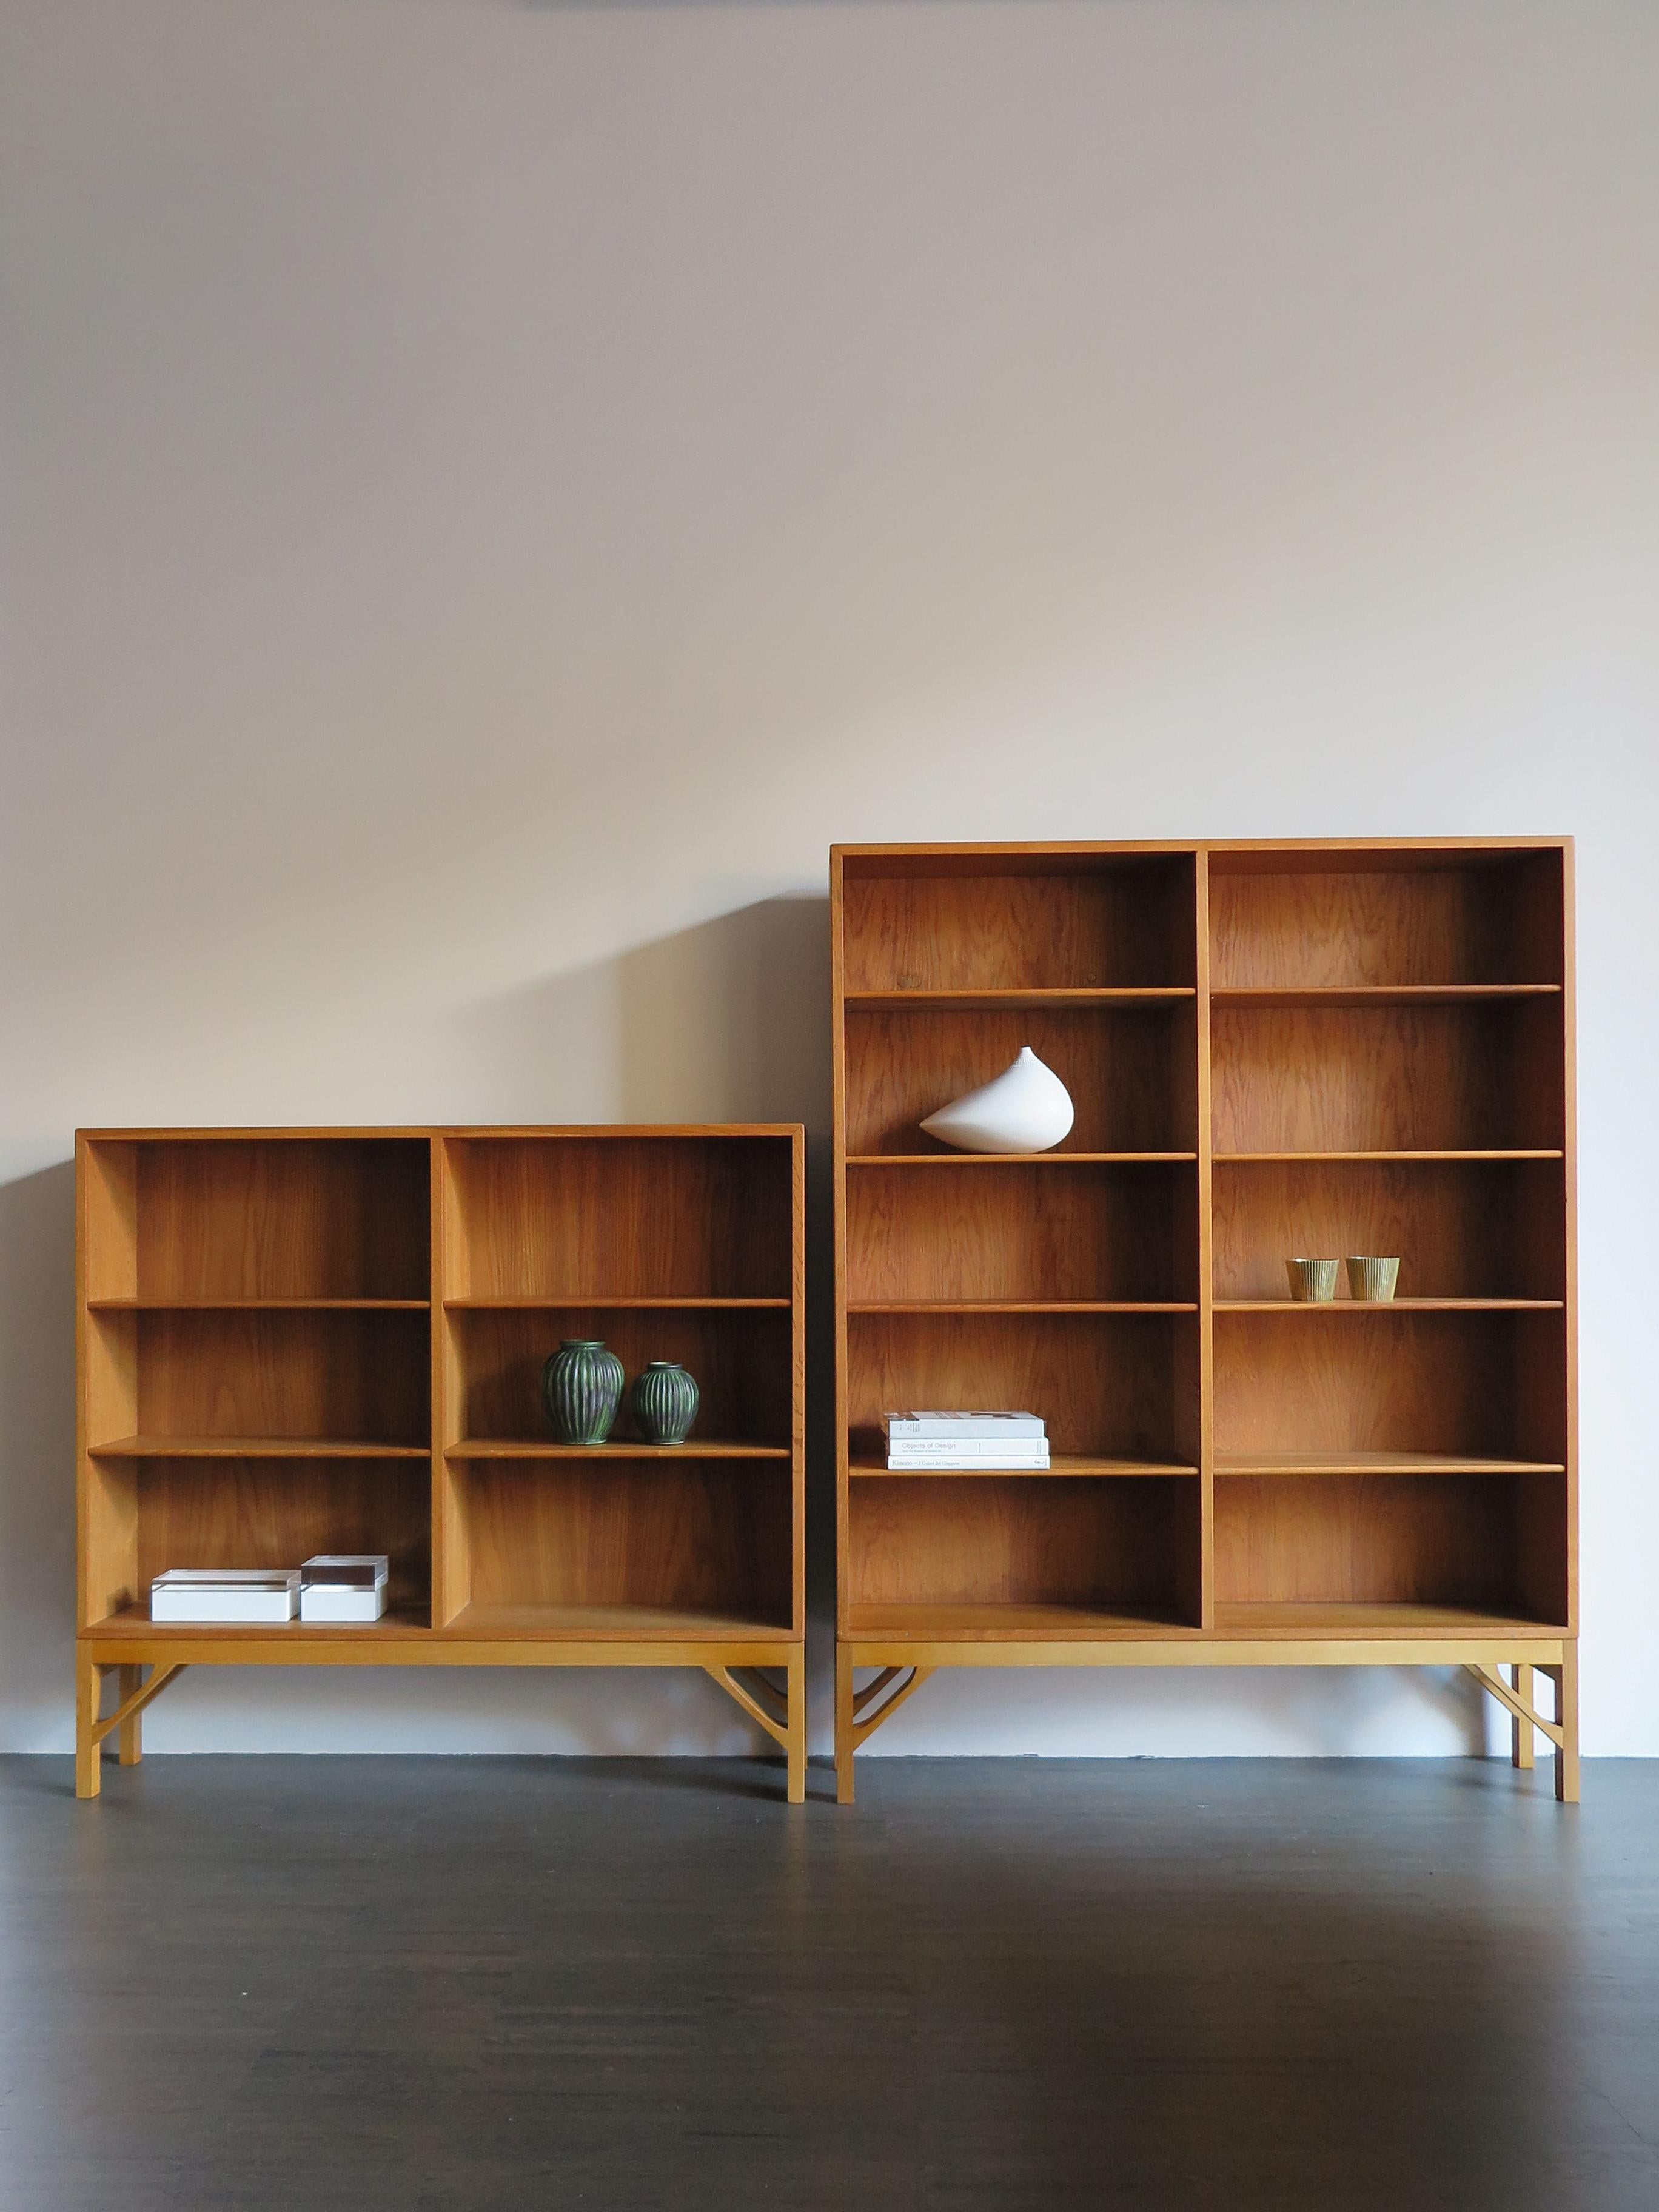 Scandinavian midcentury modern design set of two oak bookcases designed by Børge Mogensen in the 1950s and produced by FDB Møbler from 1960s, variable height position of shelves, circa 1960s.

Please note that the items are original of the period